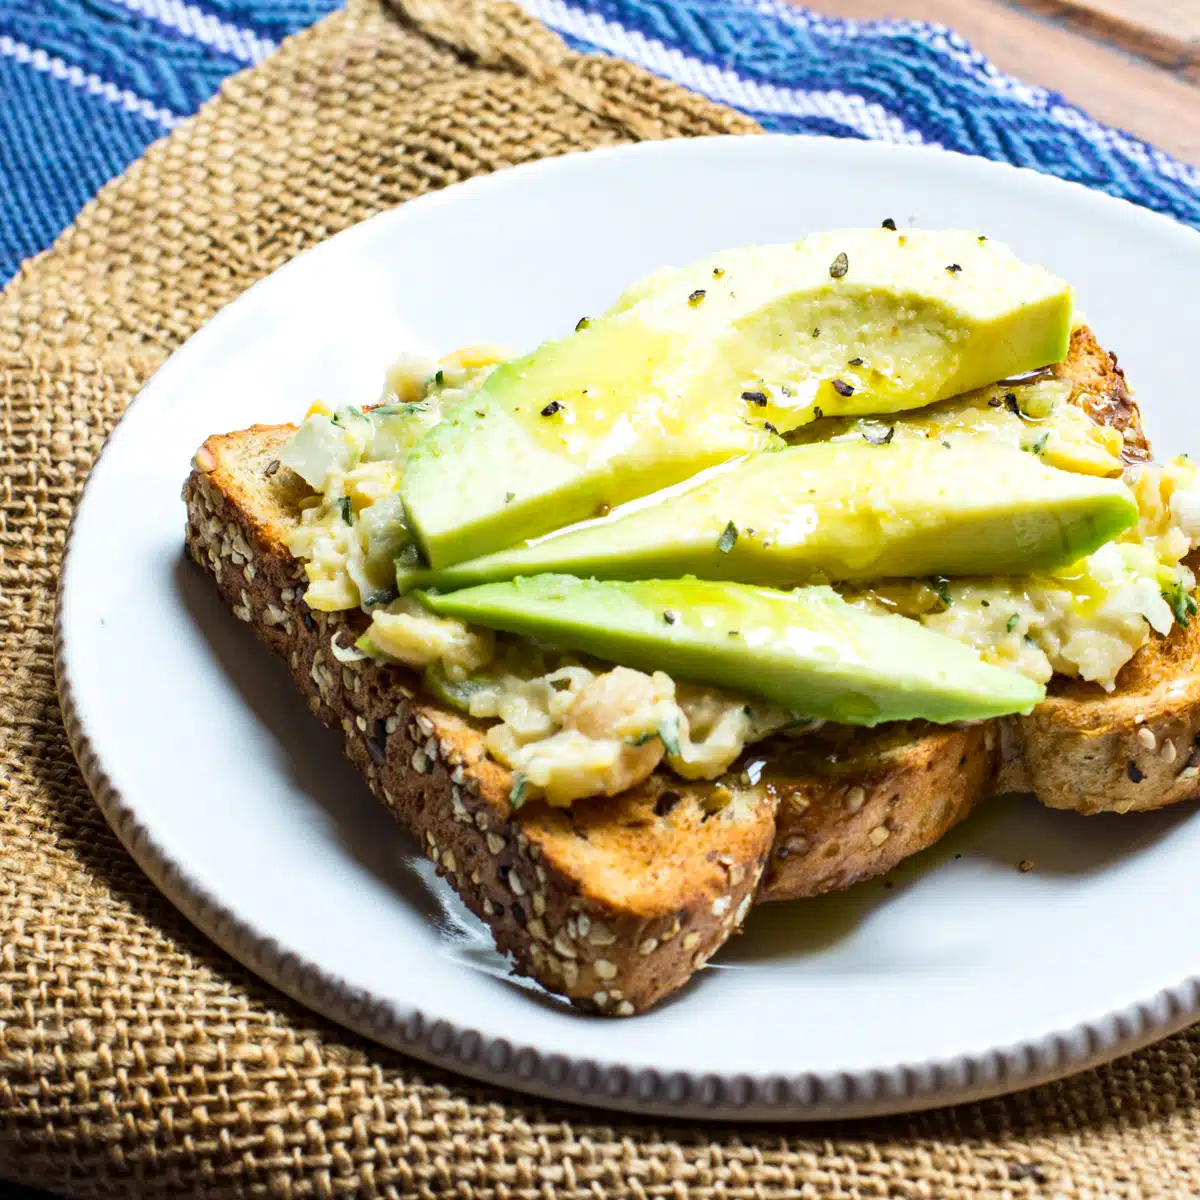 Chickpea salad spread on toast and topped with slices of avocado, a drizzle of olive oil and seasoned salt.